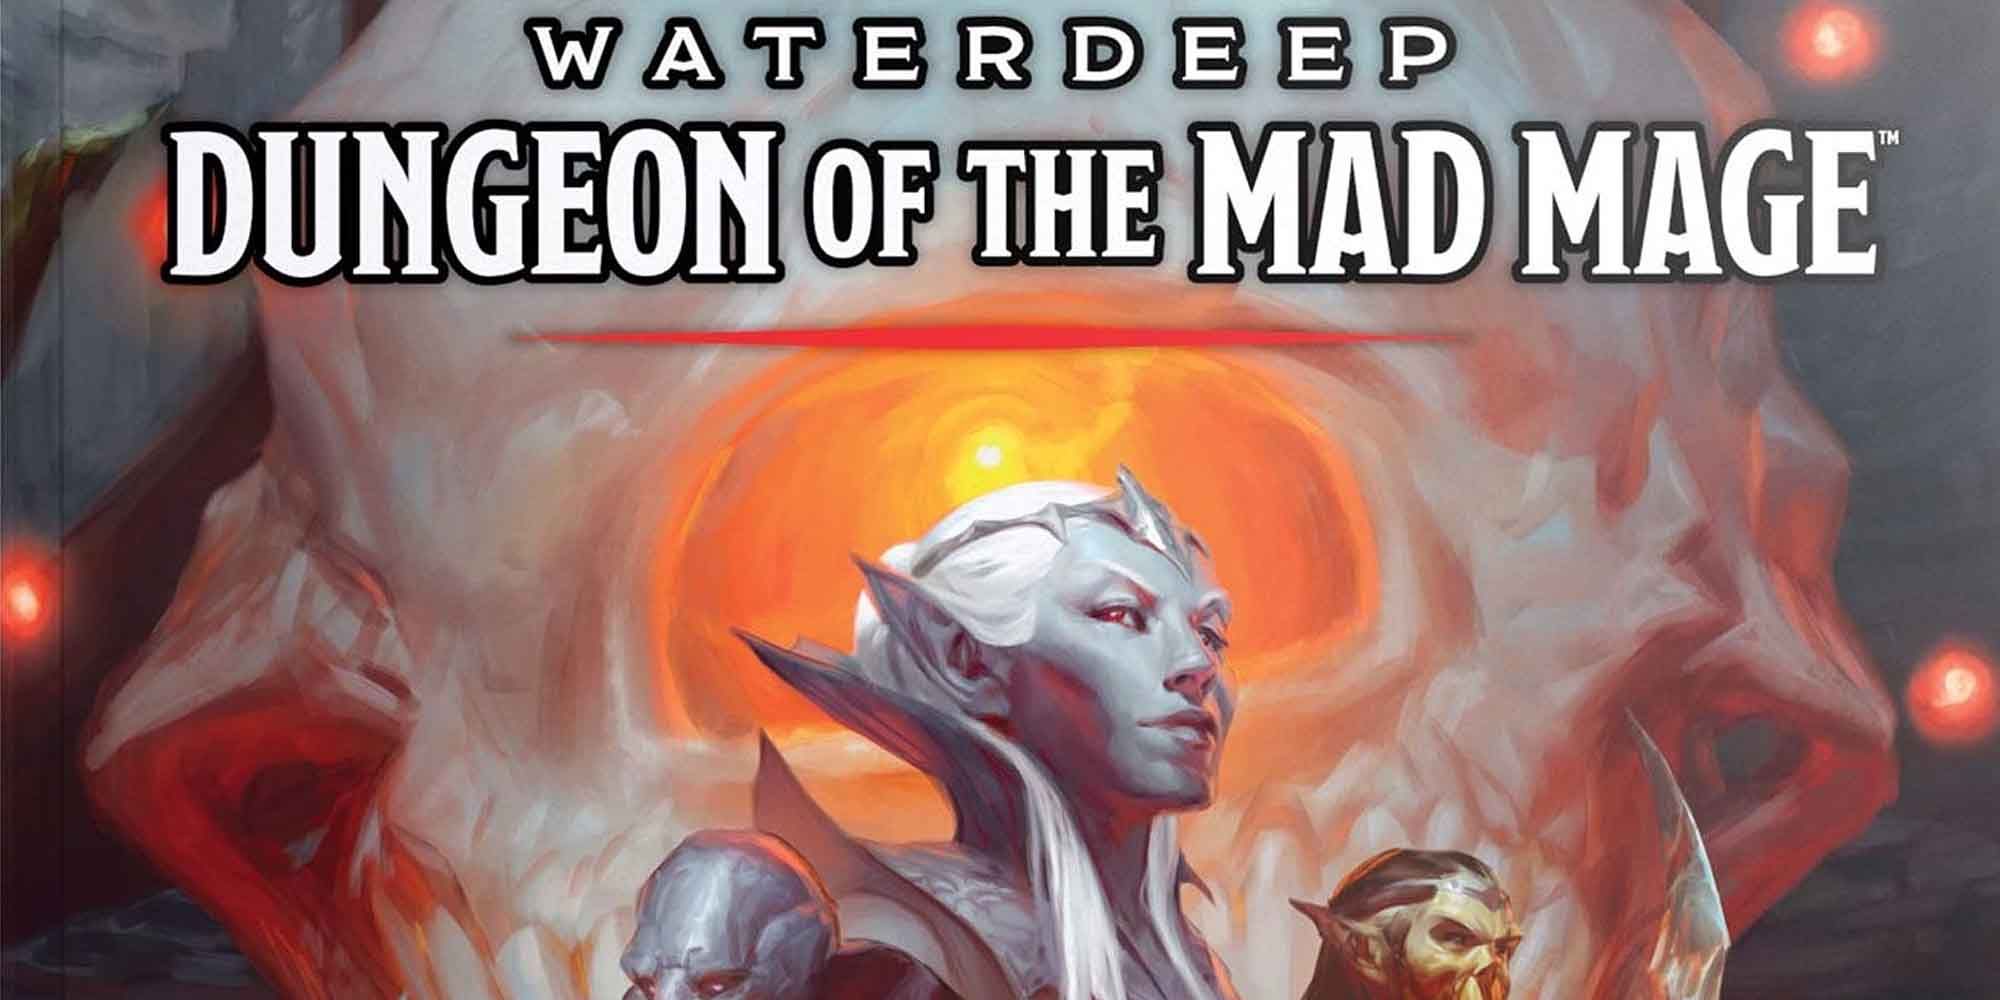 The cover of the Dungeon of the Mad Mage campaign book